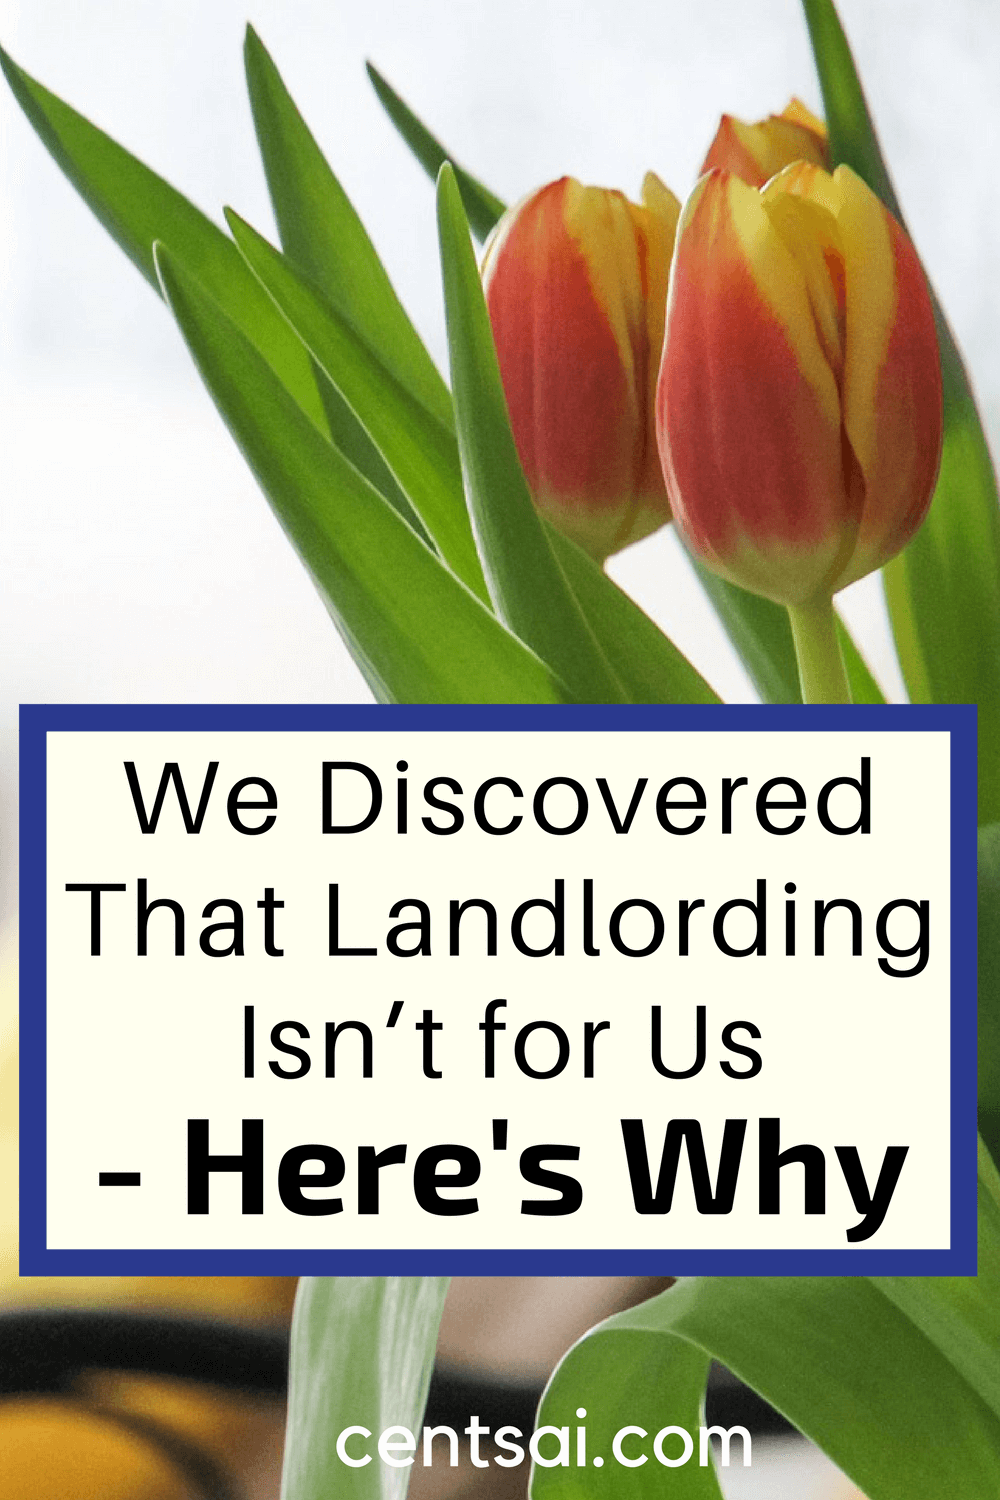 We Discovered That Landlording Isn’t for Us – Here’s Why. Landlording just isn't for everybody. We discovered the hard way that owning rental real estate isn't as easy as people make it out to be.